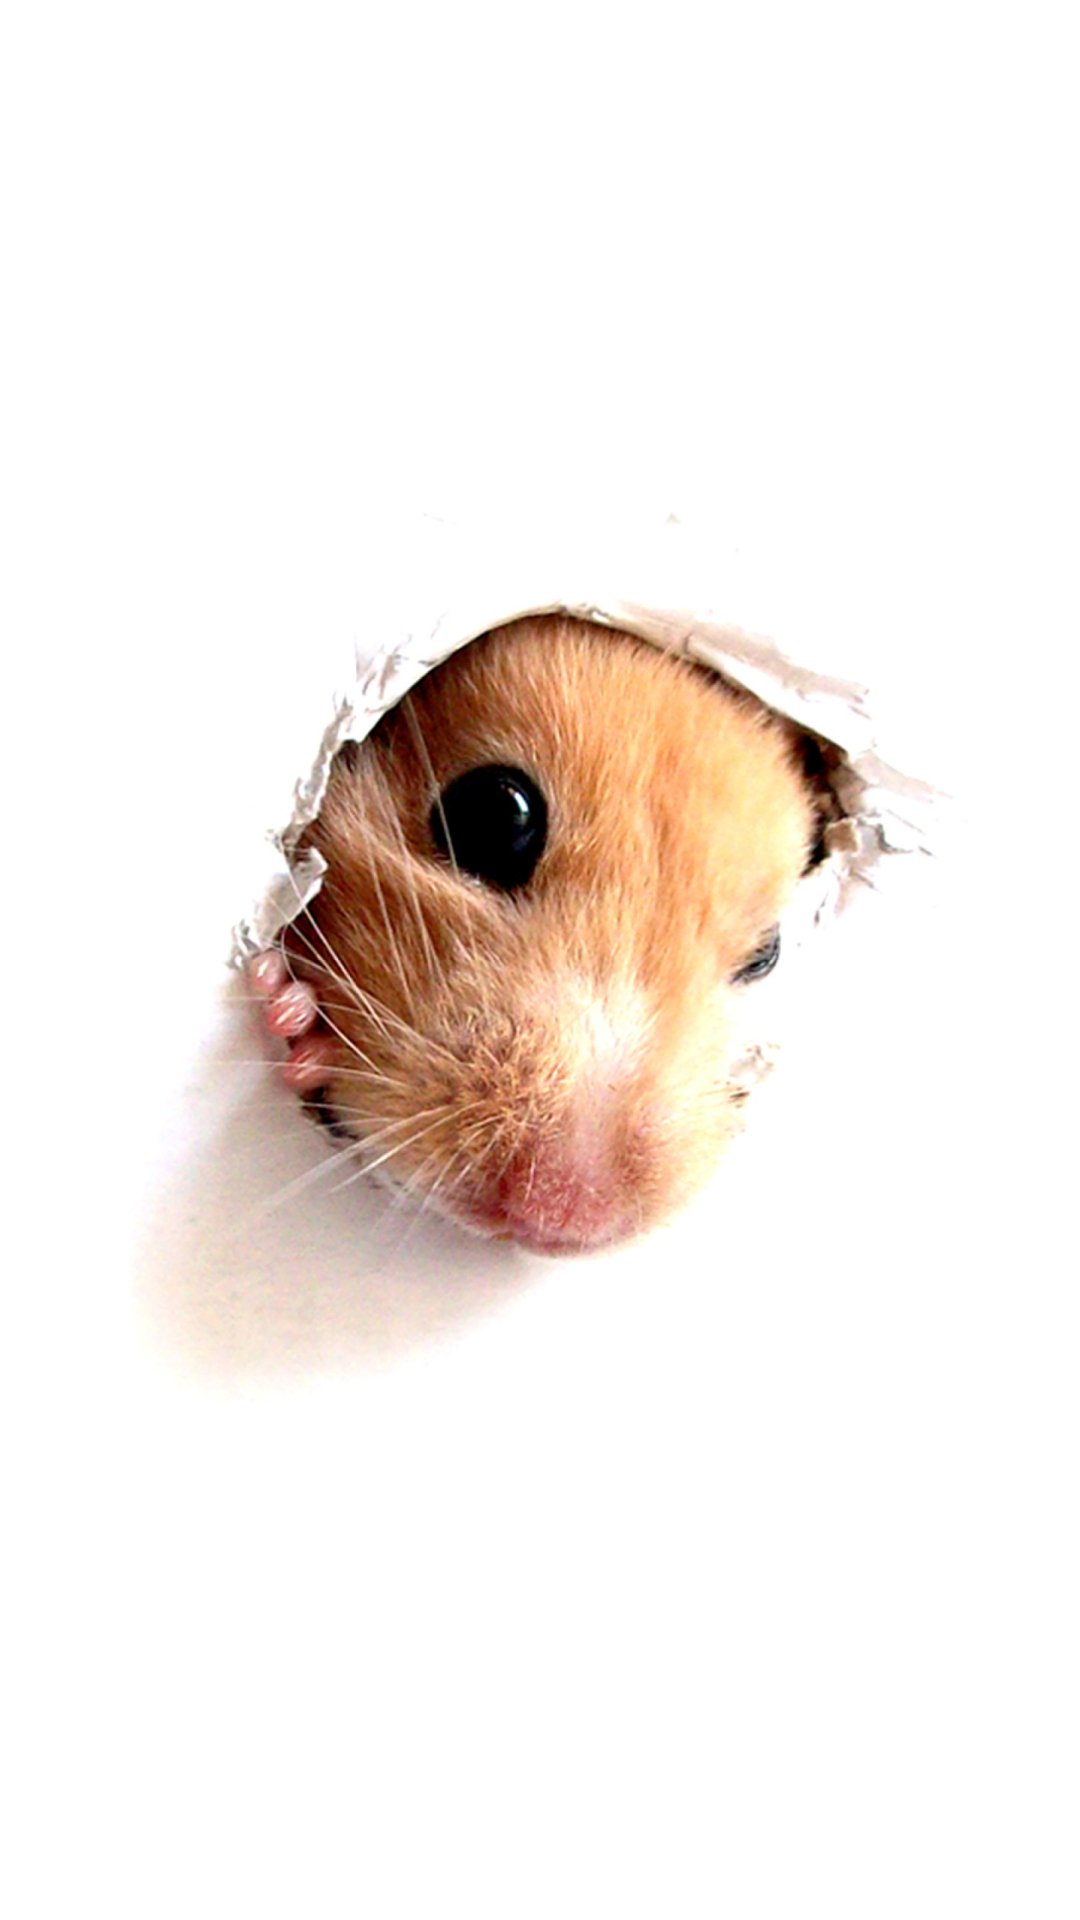 Hamster In Hole On Your Screen wallpaper 1080x1920